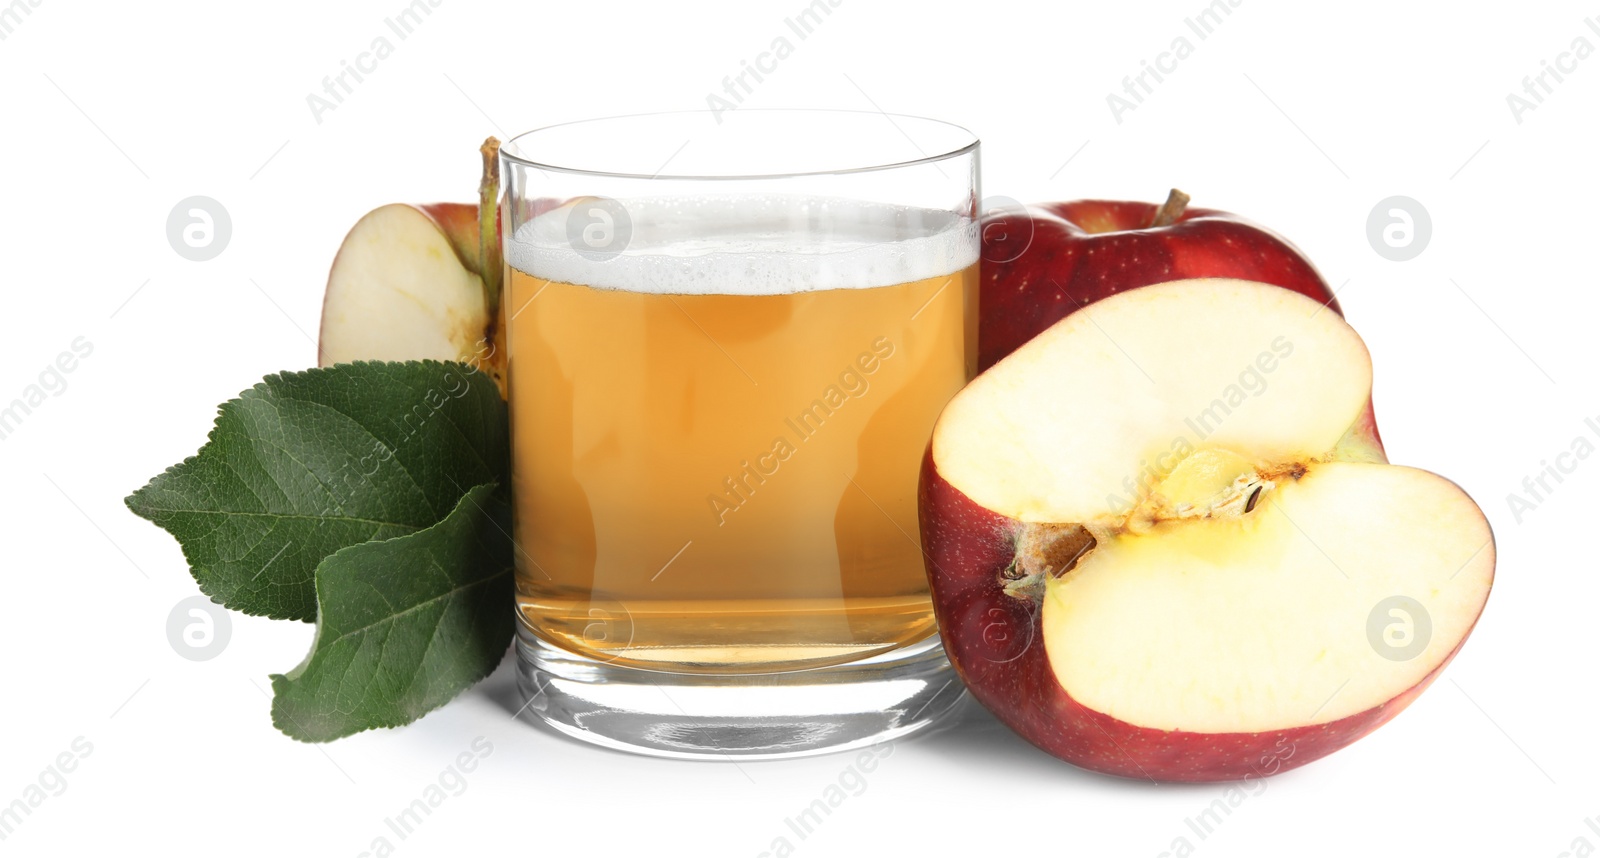 Photo of Delicious cider in glass near ripe apples on white background